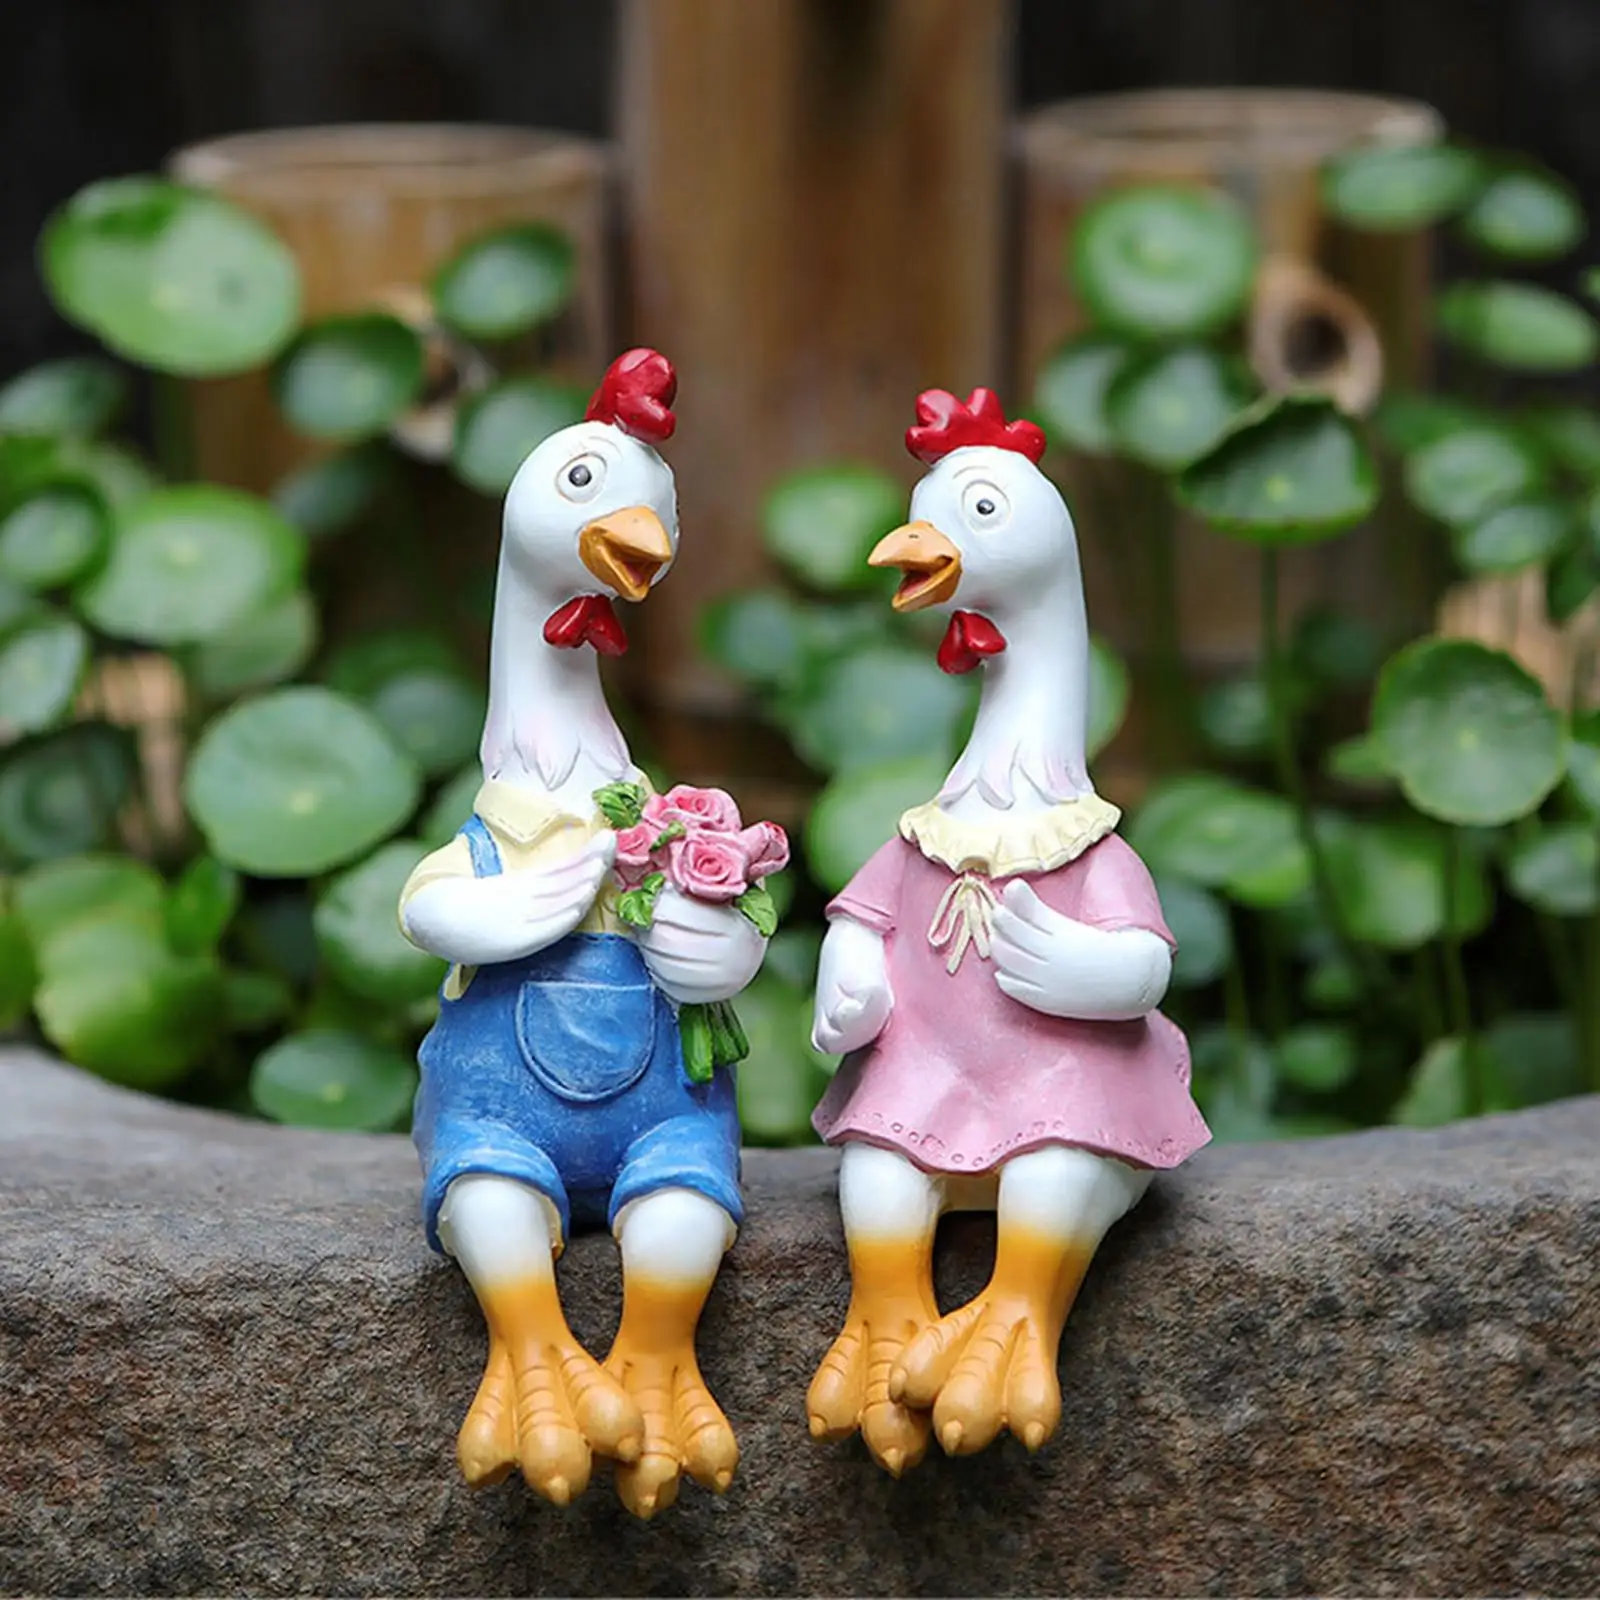 Funny Rooster and Hen Statue Animal Figurine Handicraft Crafts for Yard Balcony Flower Bed Landscaping Decor